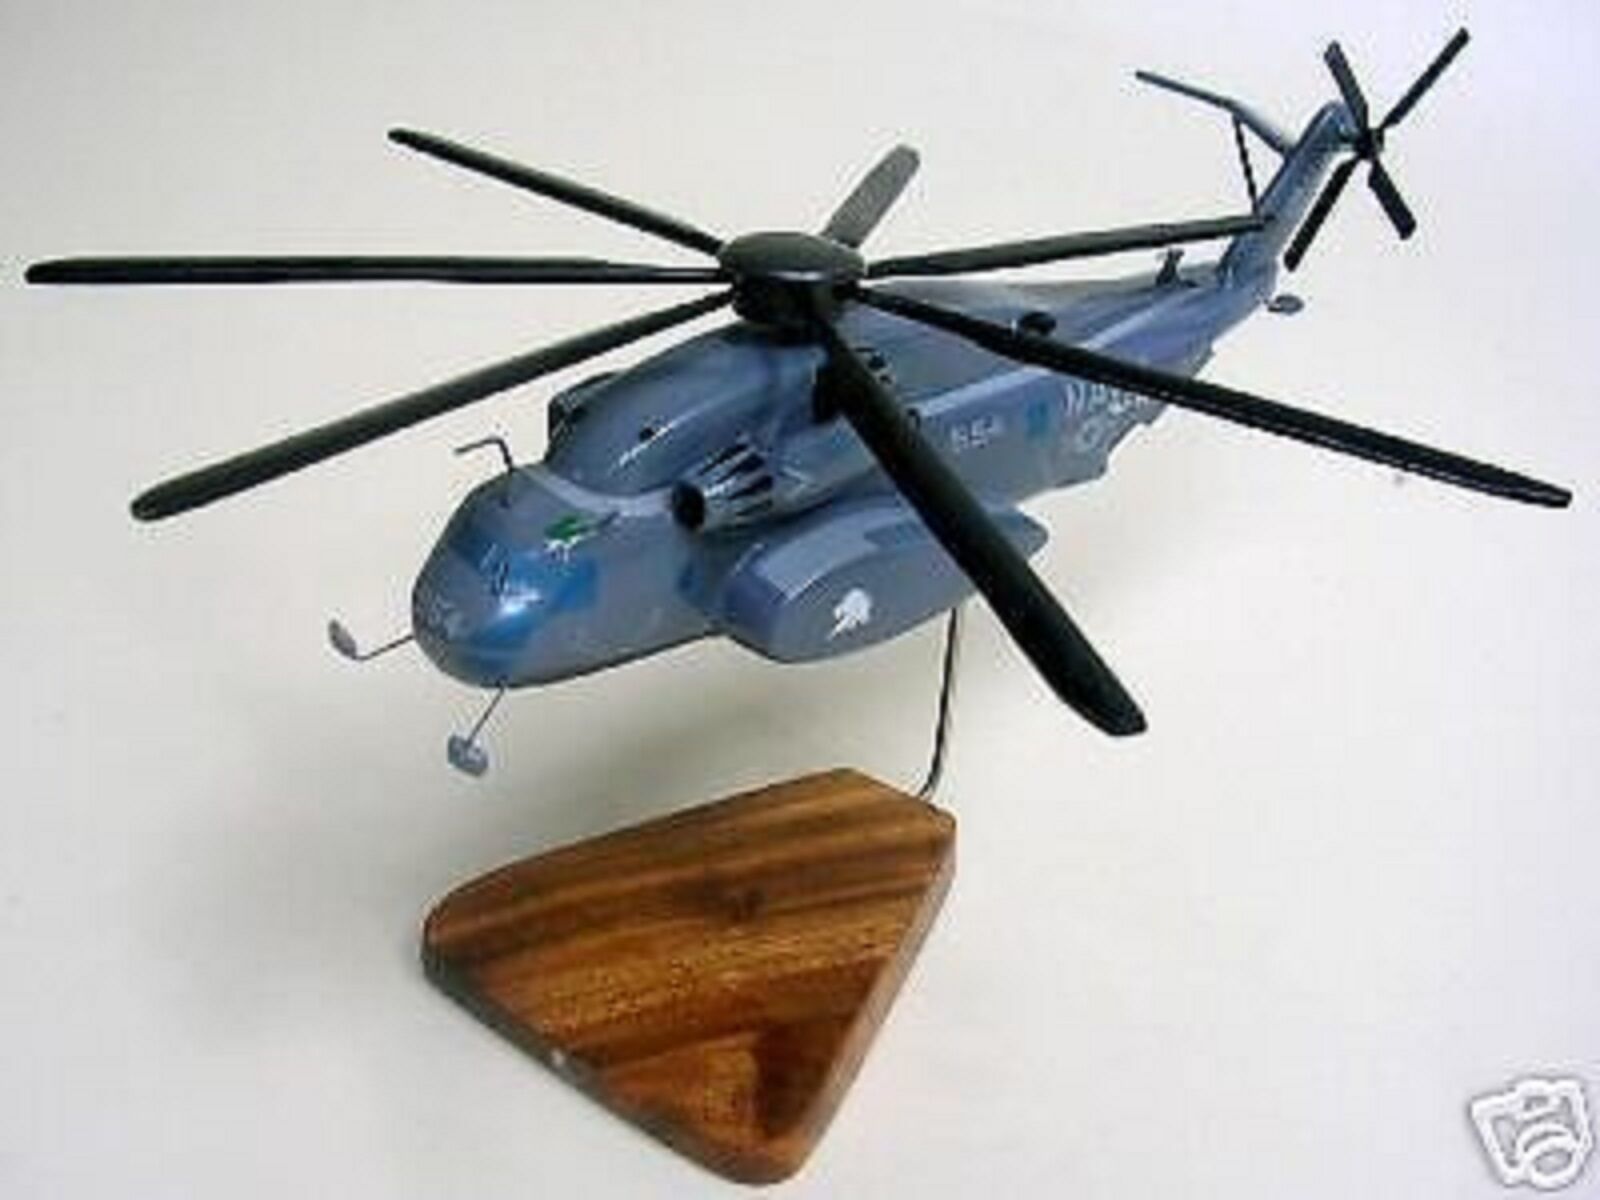 MH-53E Sea Dragon Sikorsky MH53E Helicopter Desktop Wood Model Small New